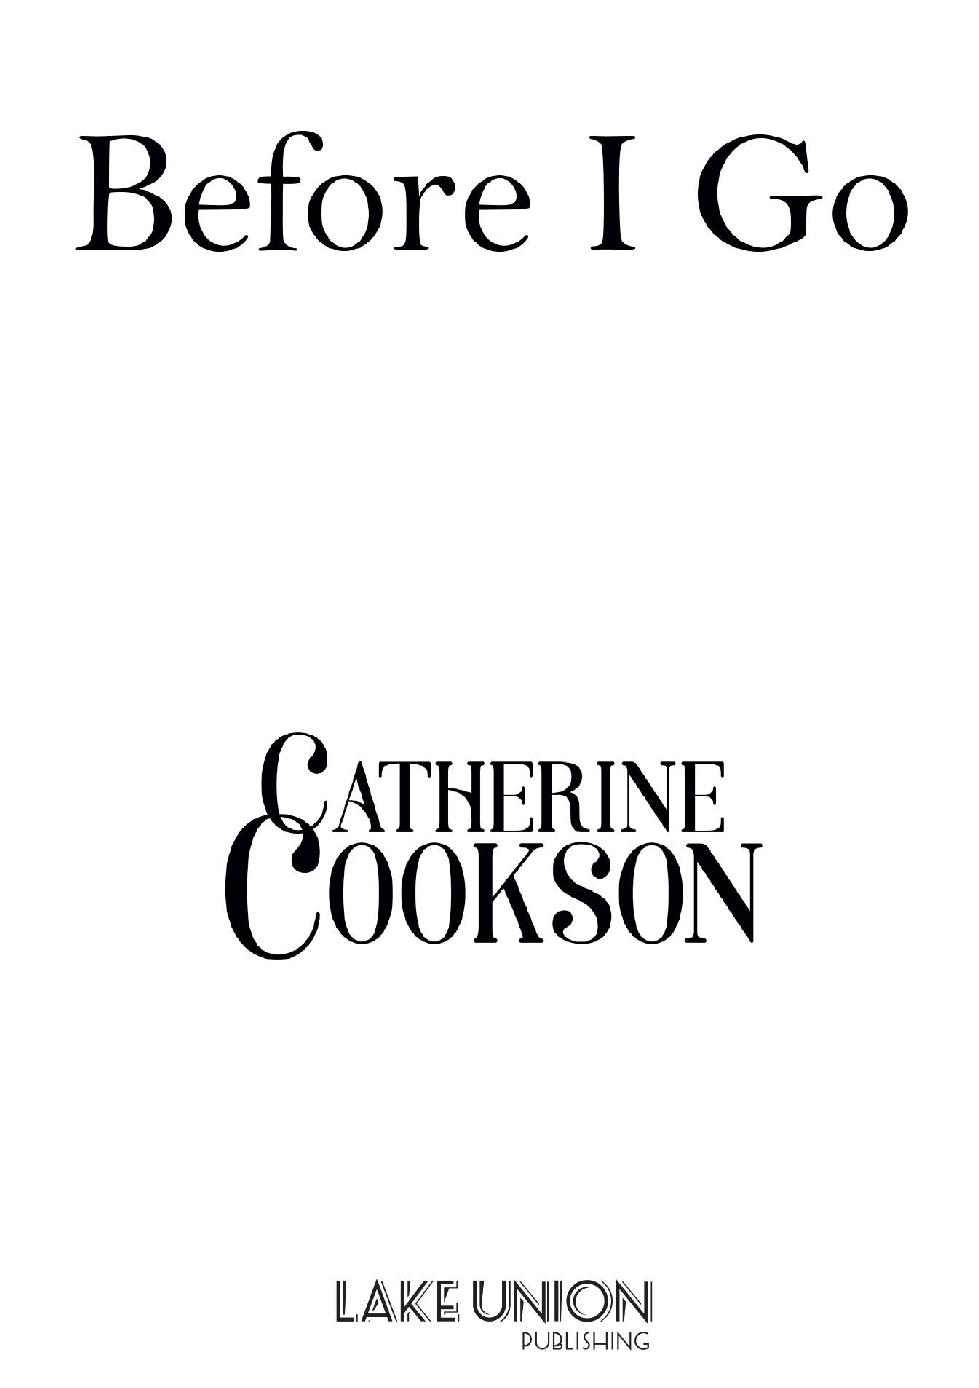 Text copyright 2017 The Trustees of the Catherine Cookson Trust All rights - photo 2